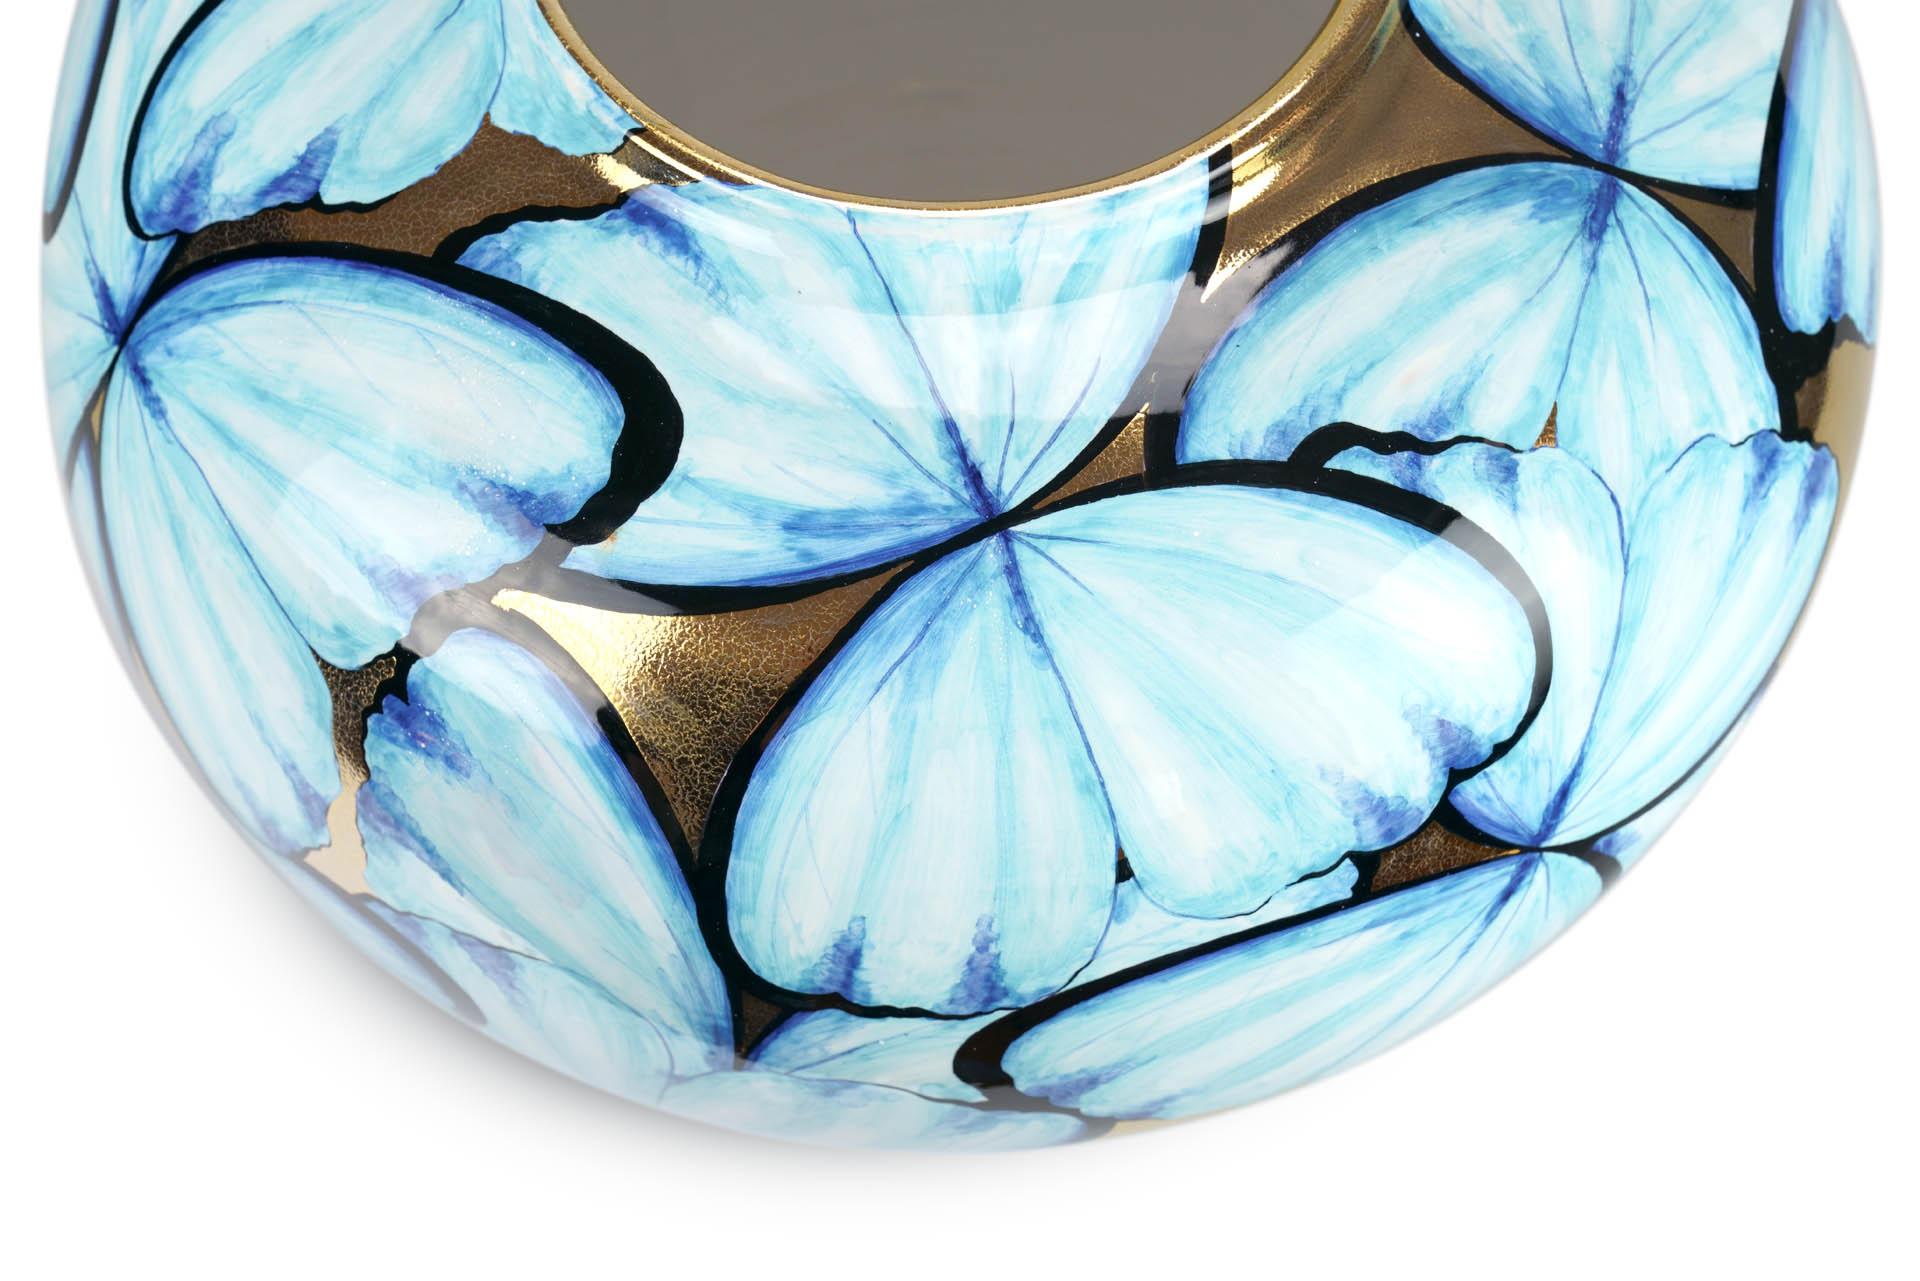 Large Ceramic Vase Hand-Painted Light Blue Butterflies, 24kt Gold Luster, Italy  For Sale 2